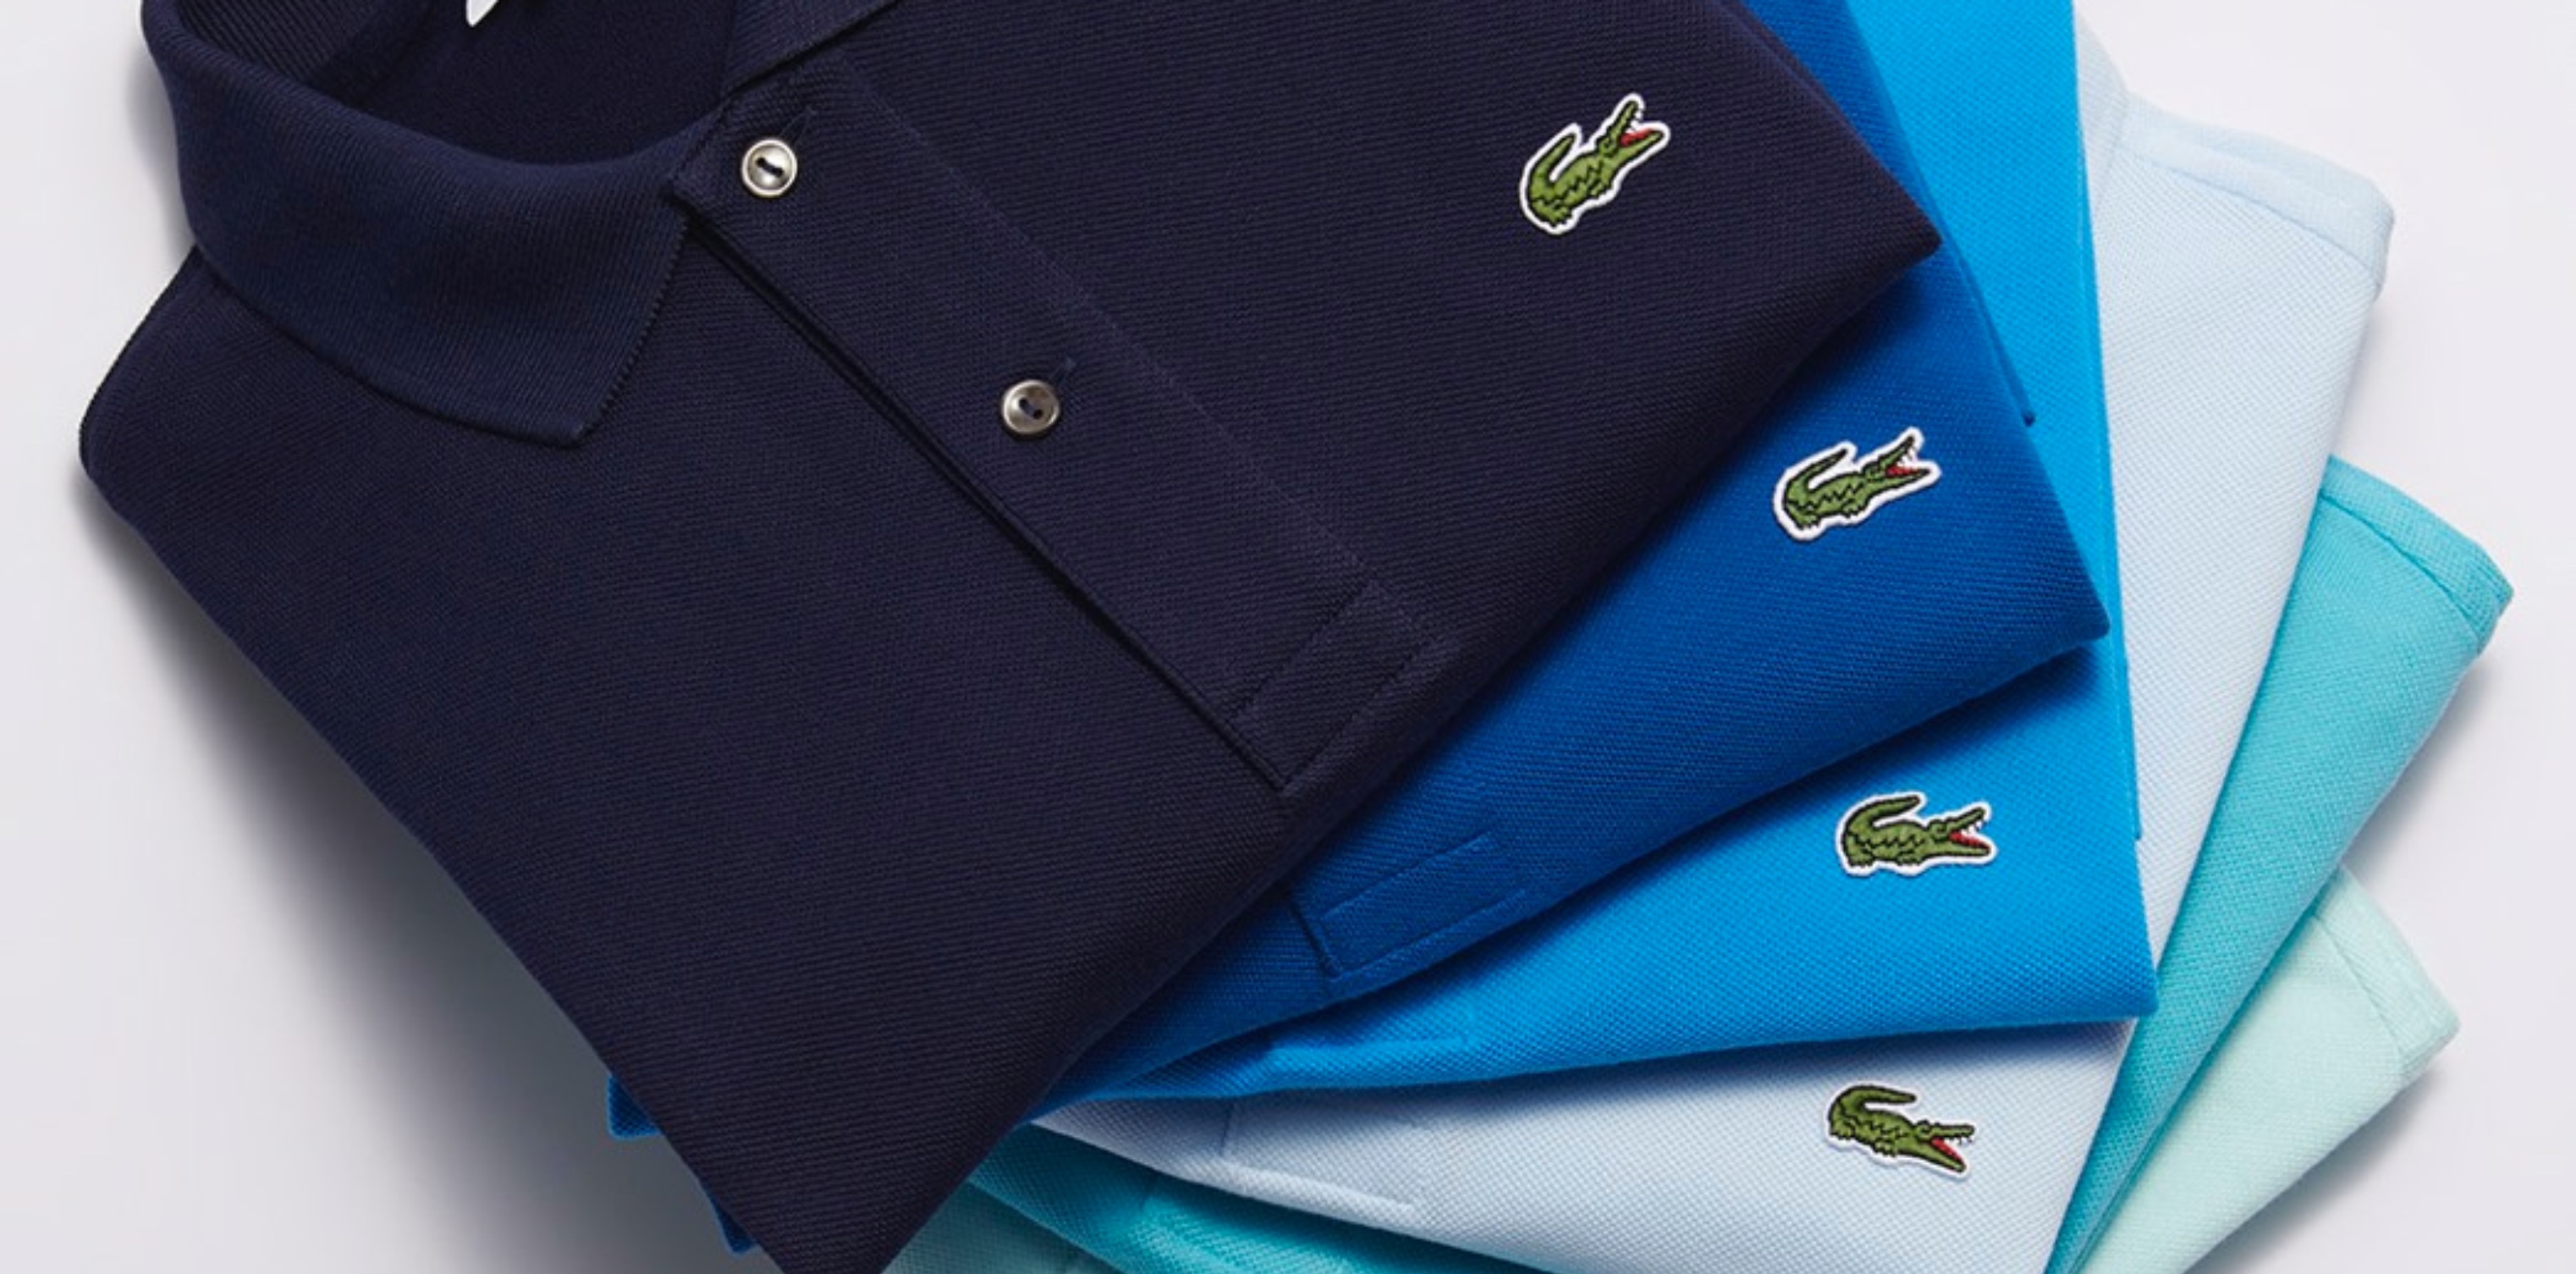 Lacoste updates spring wardrobe with to 50% polos, t-shirts, shoes, more